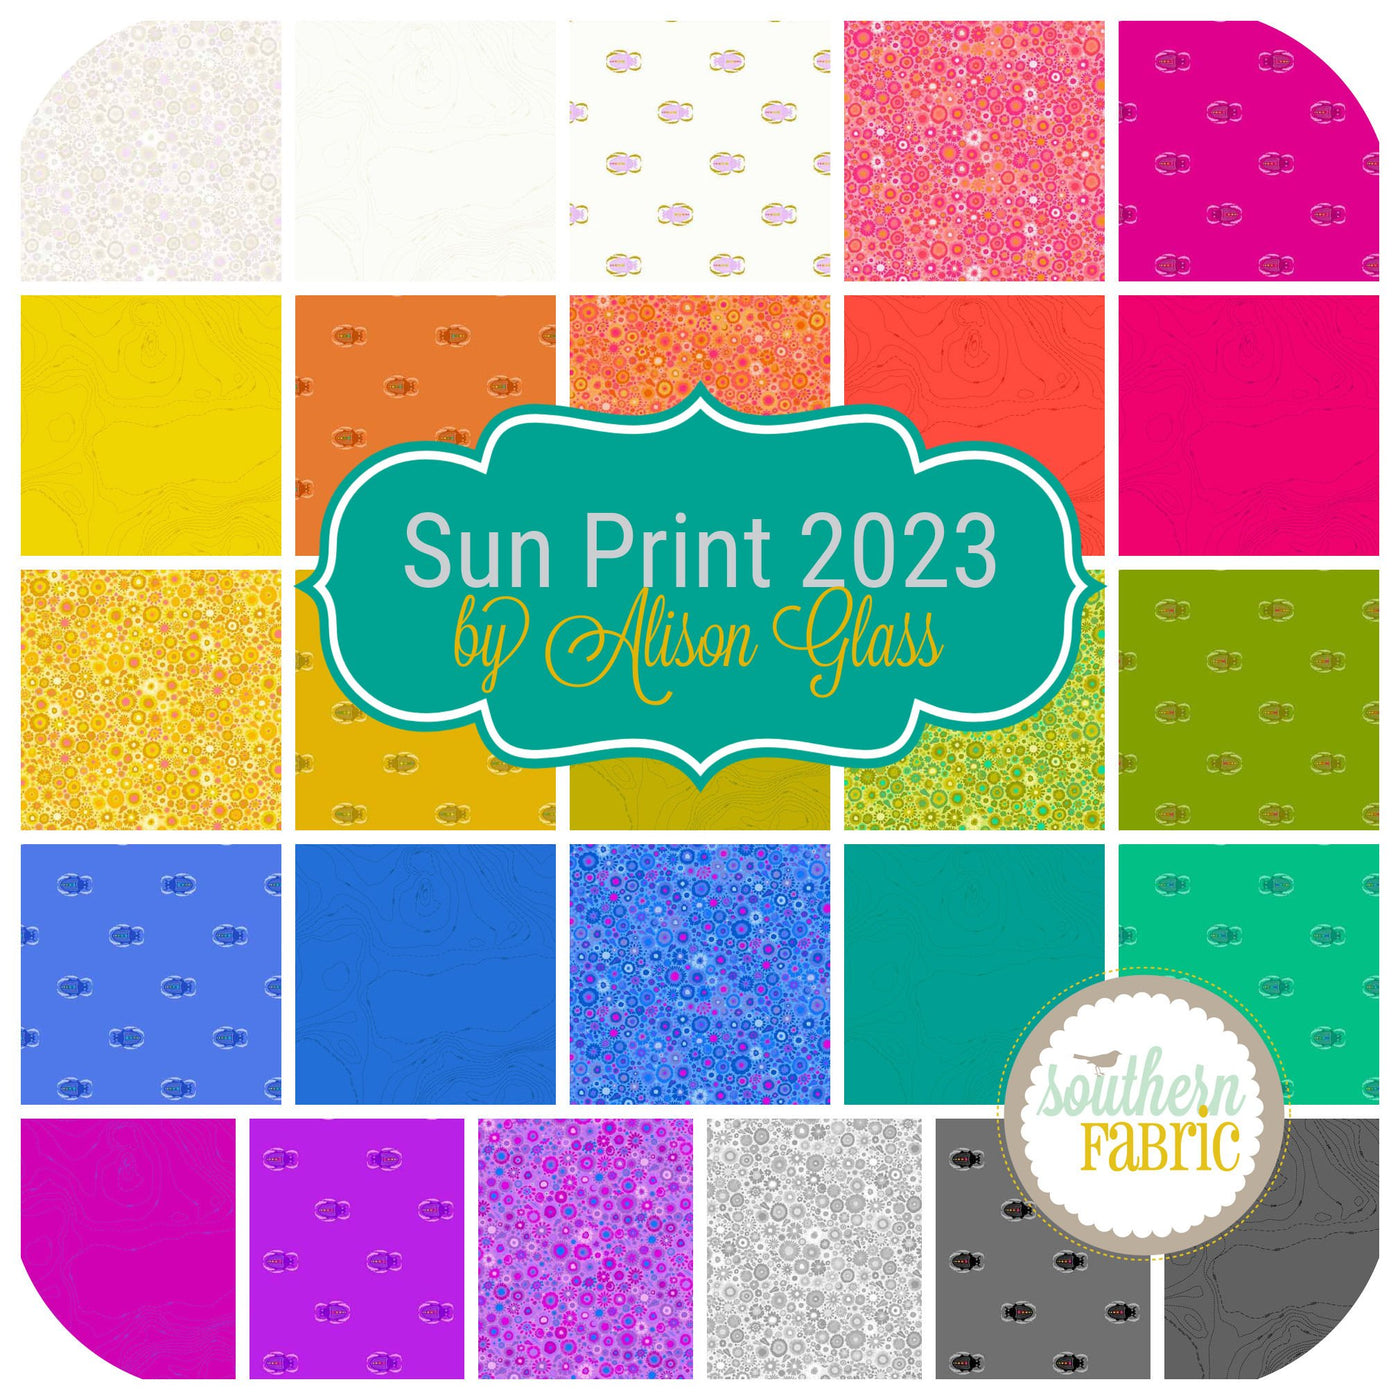 Sun Print 2023 Layer Cake (42 pcs) by Alison Glass for Andover (3S-SP23-X)